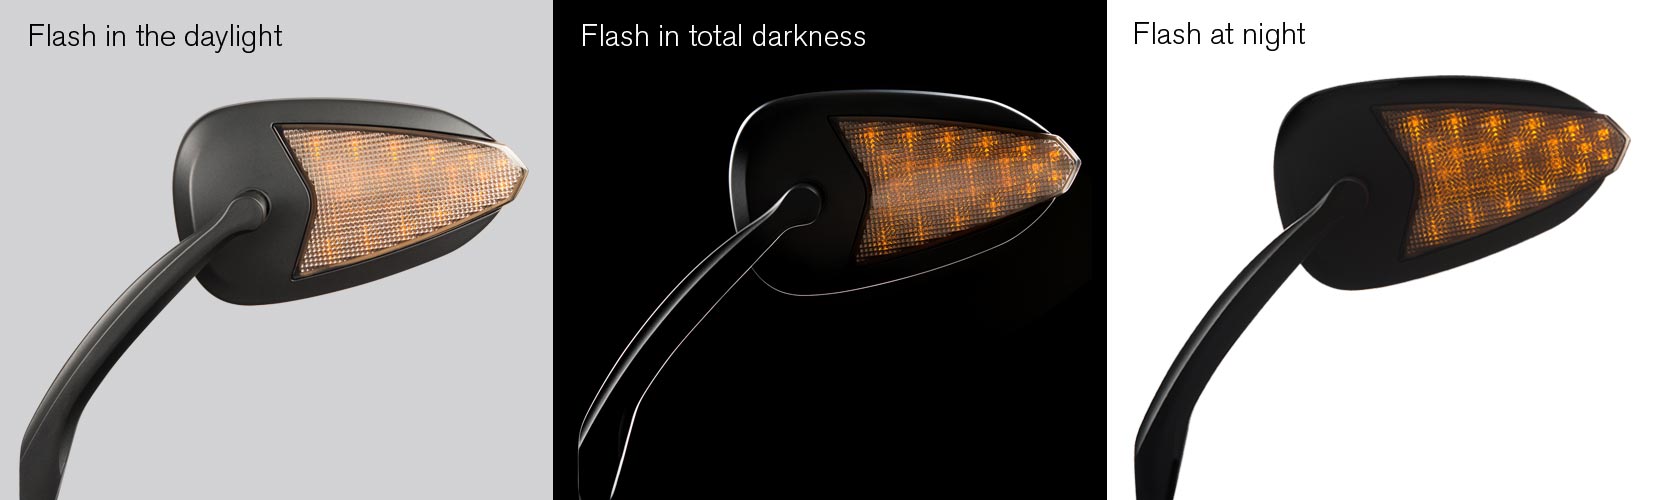 Flash LED Motorcycle mirror turn signal, driving light, in the daylight, at night, in total darkness